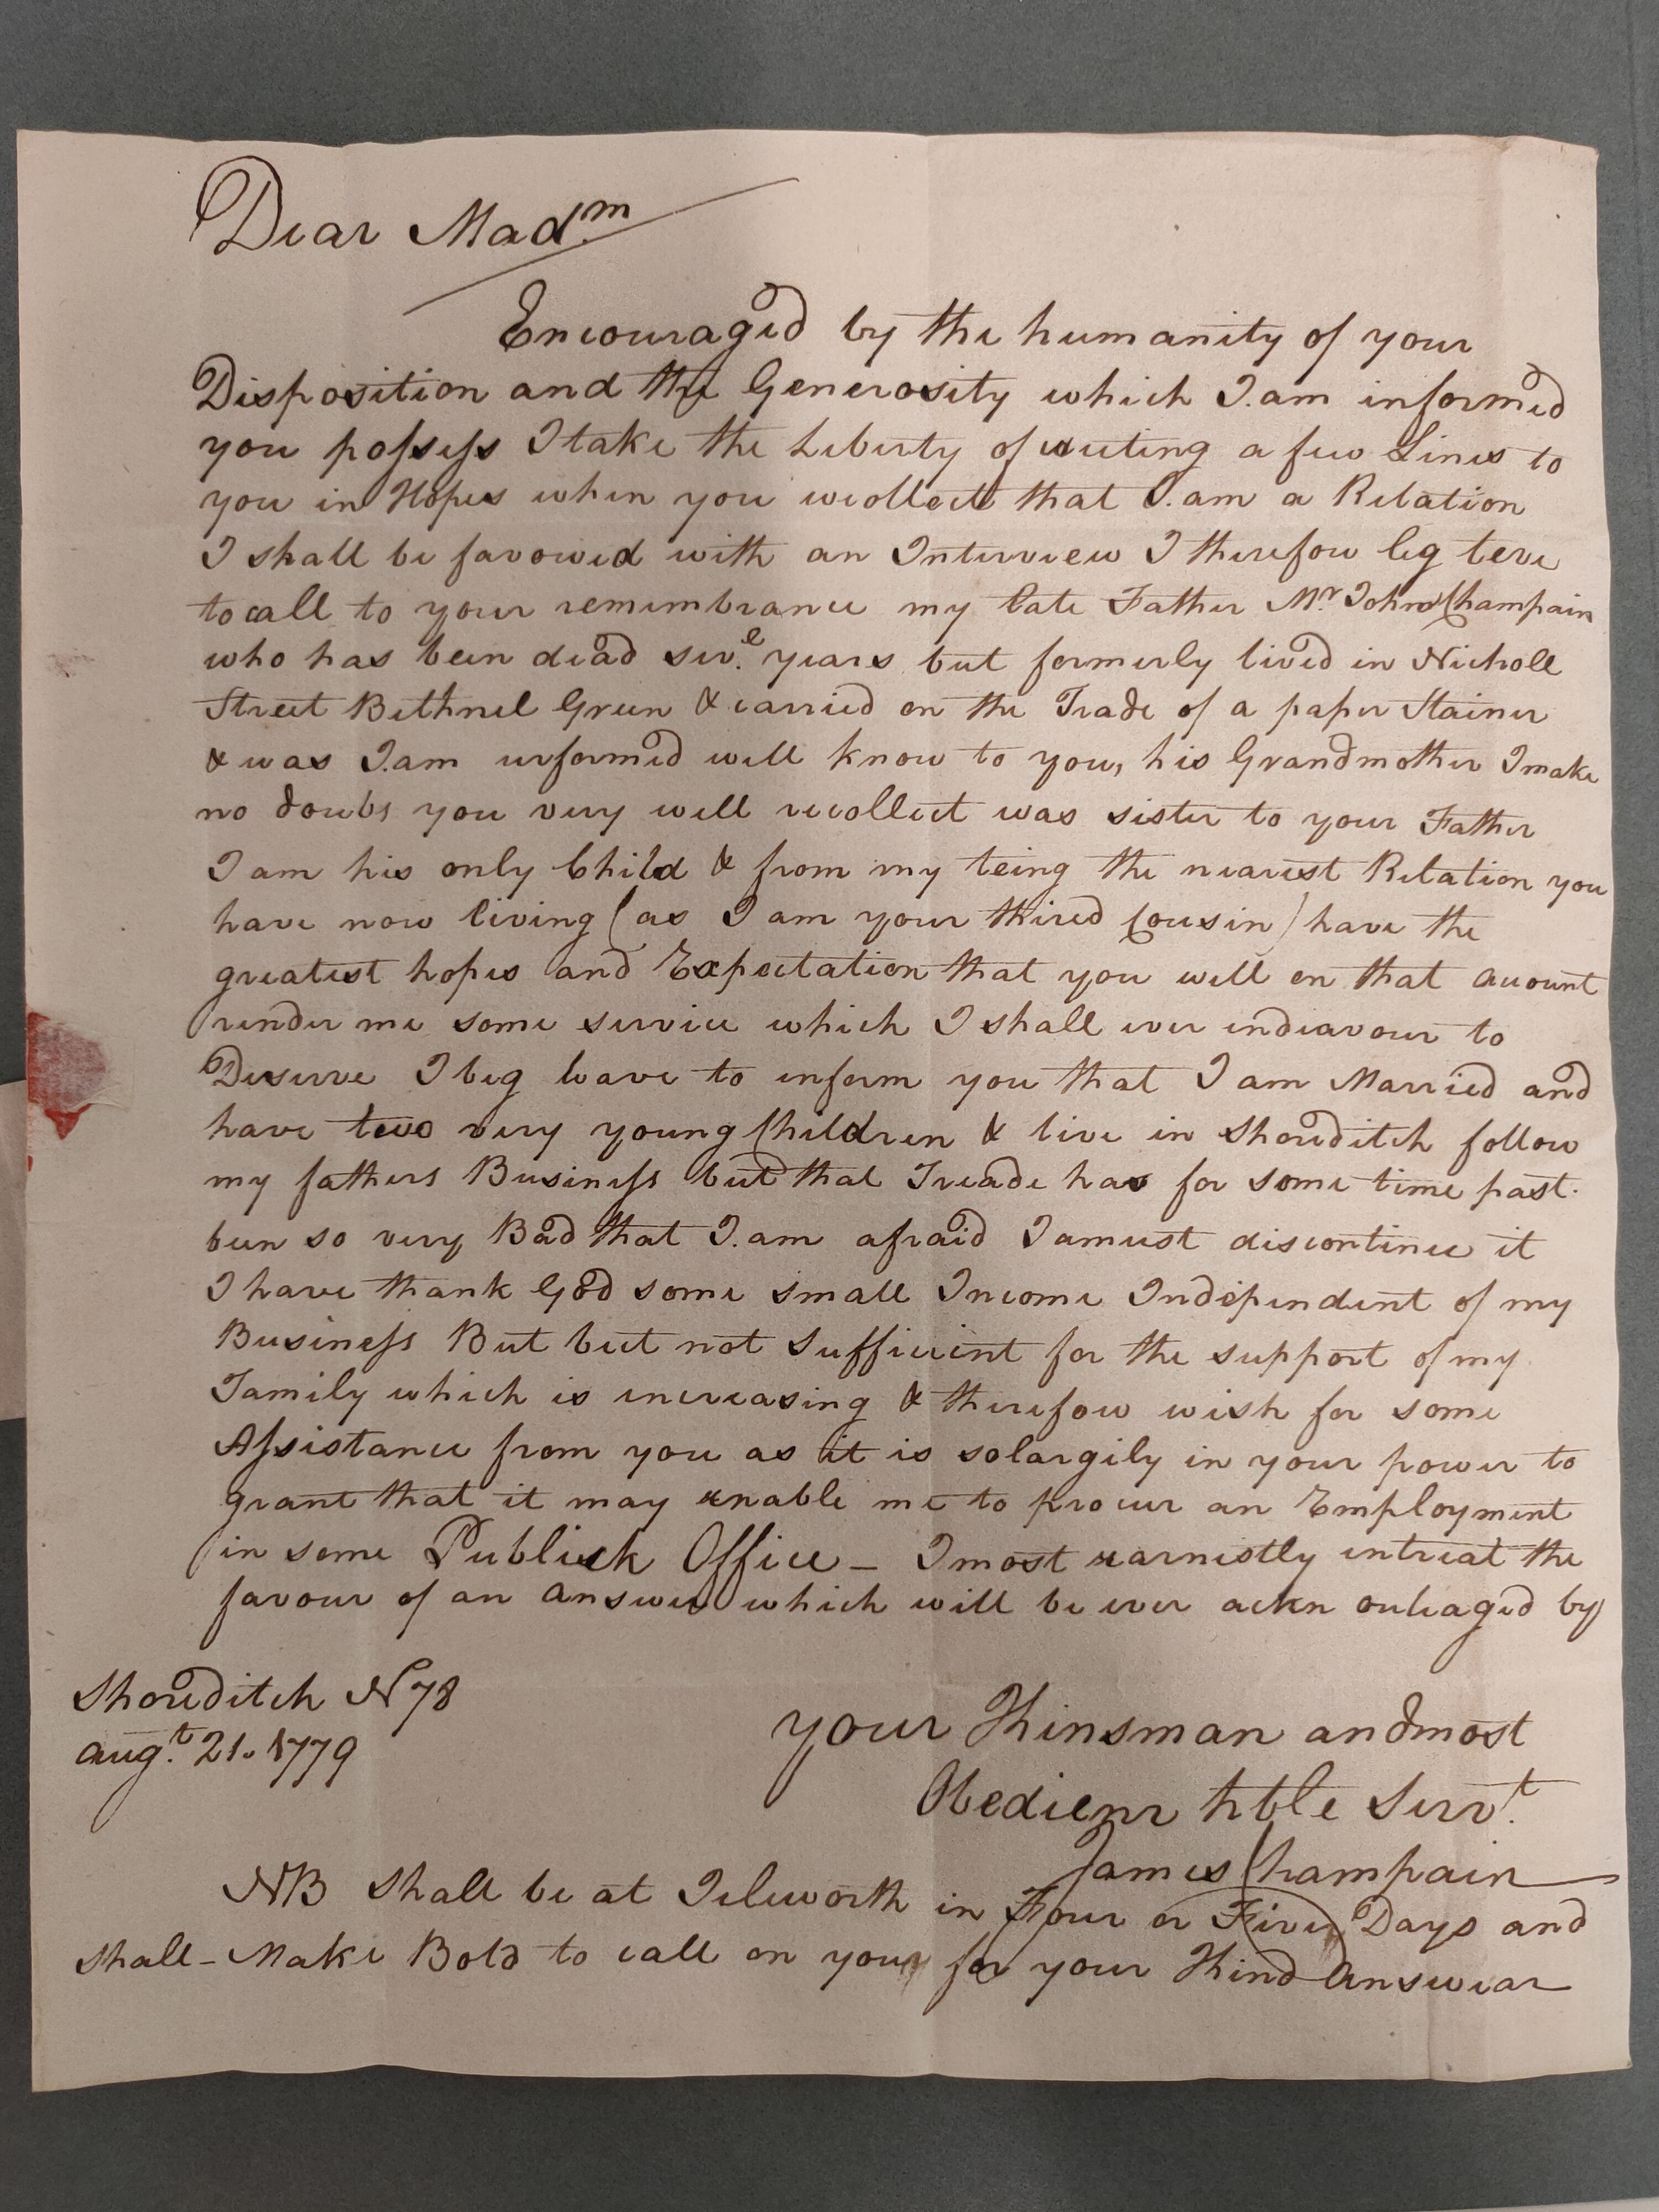 Image #1 of letter: James Champain to Martha Heddin, 21 August 1779